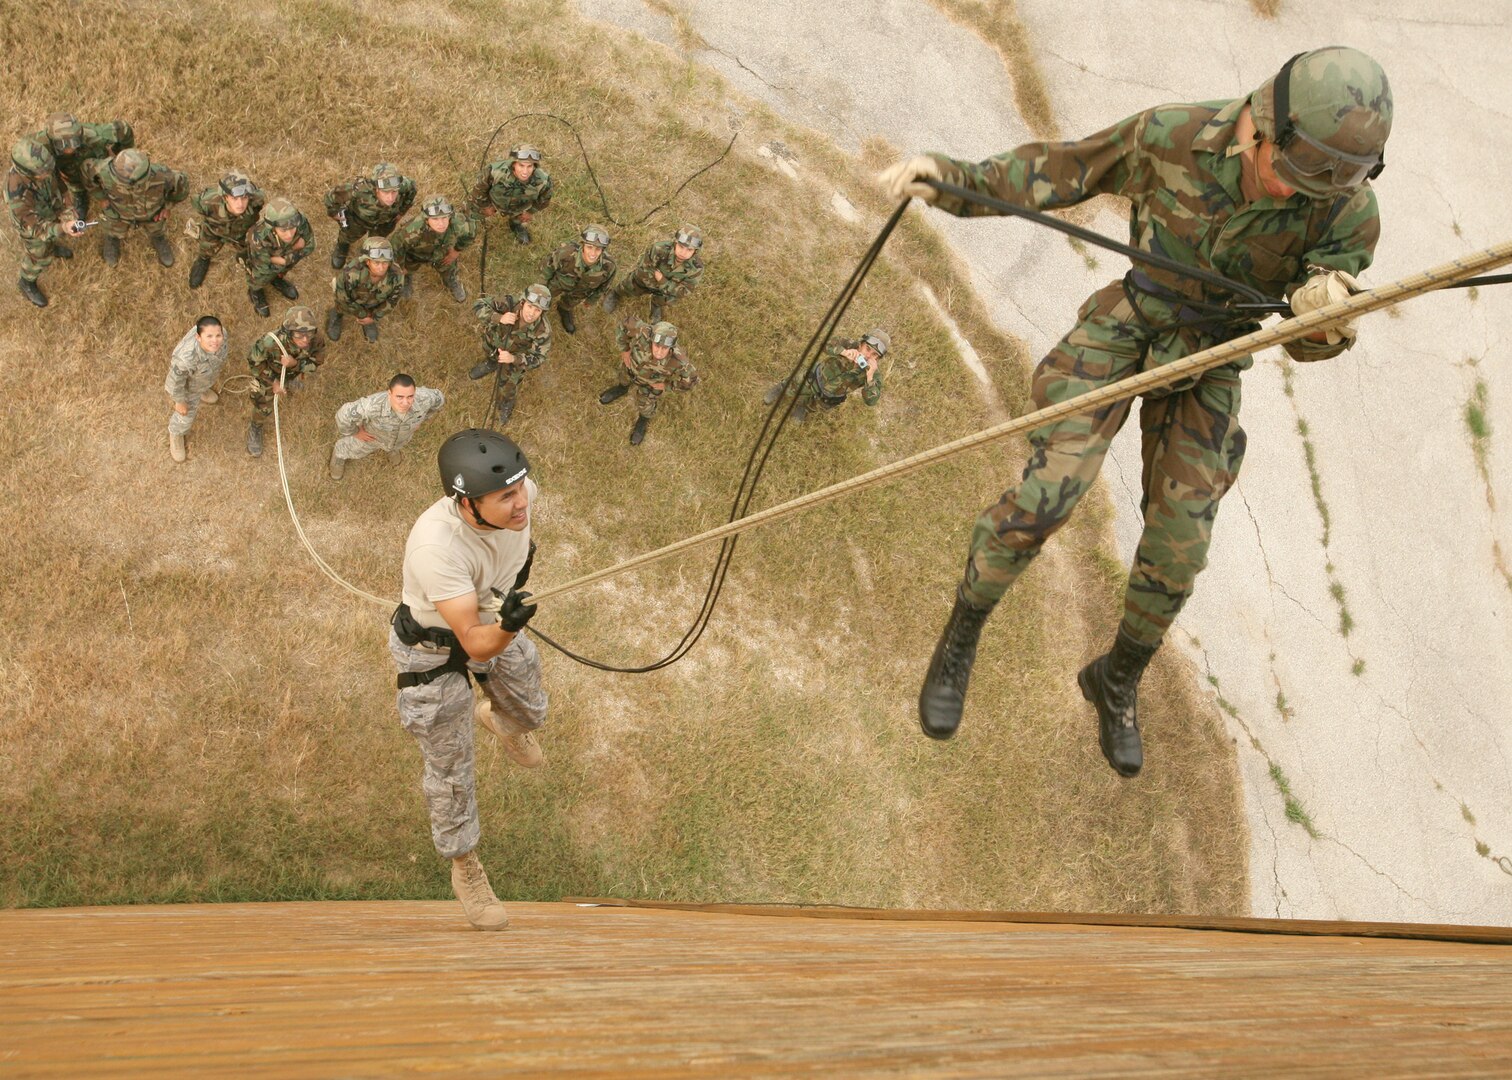 11/26/20008 - Capt. Carlos Hernandez guides Inter-American Air Forces Academy students down the rappelling wall during security forces training at Lackland Training Annex. IAAFA trains foreign military and police from Latin America in Spanish. Capt. Hernandez is with the 318th Training Squadron. (USAF photo by Robbin Cresswell)